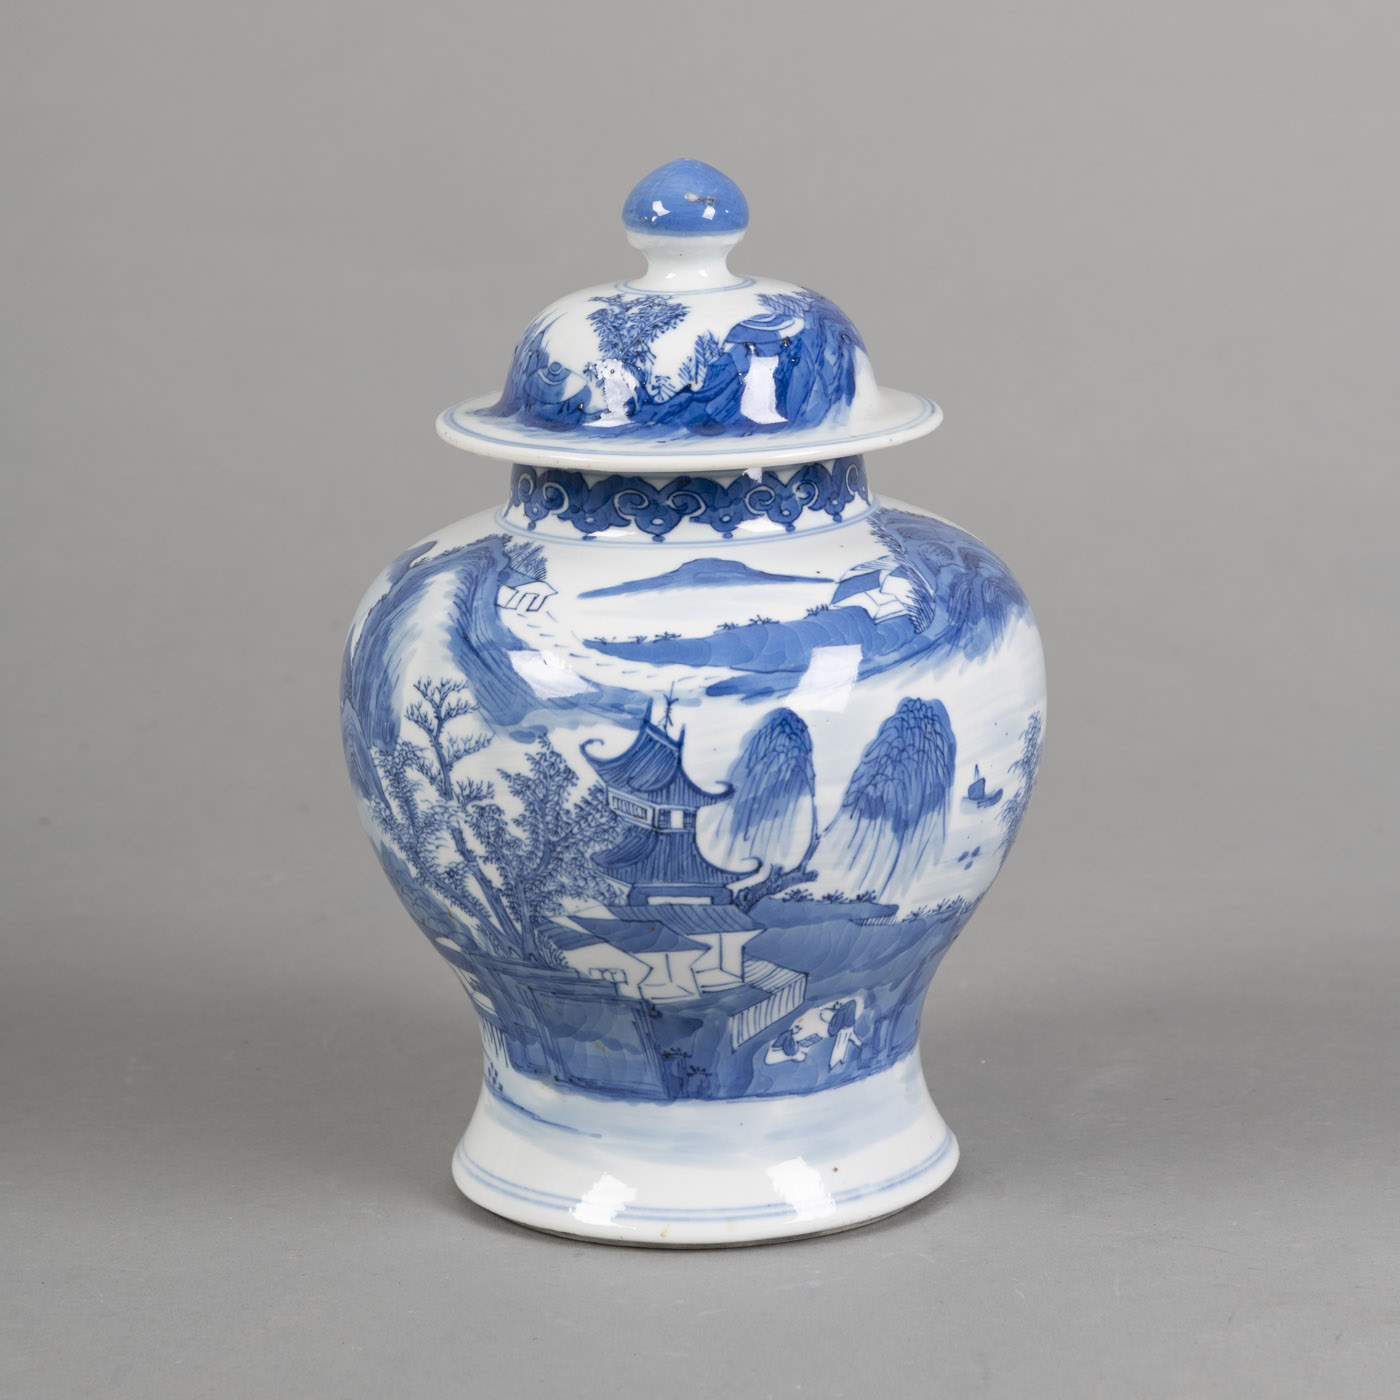 <b>A BLUE AND WHITE PORCELAIN VASE AND COVER DEPICTING A SEA LANDSCAPE</b>